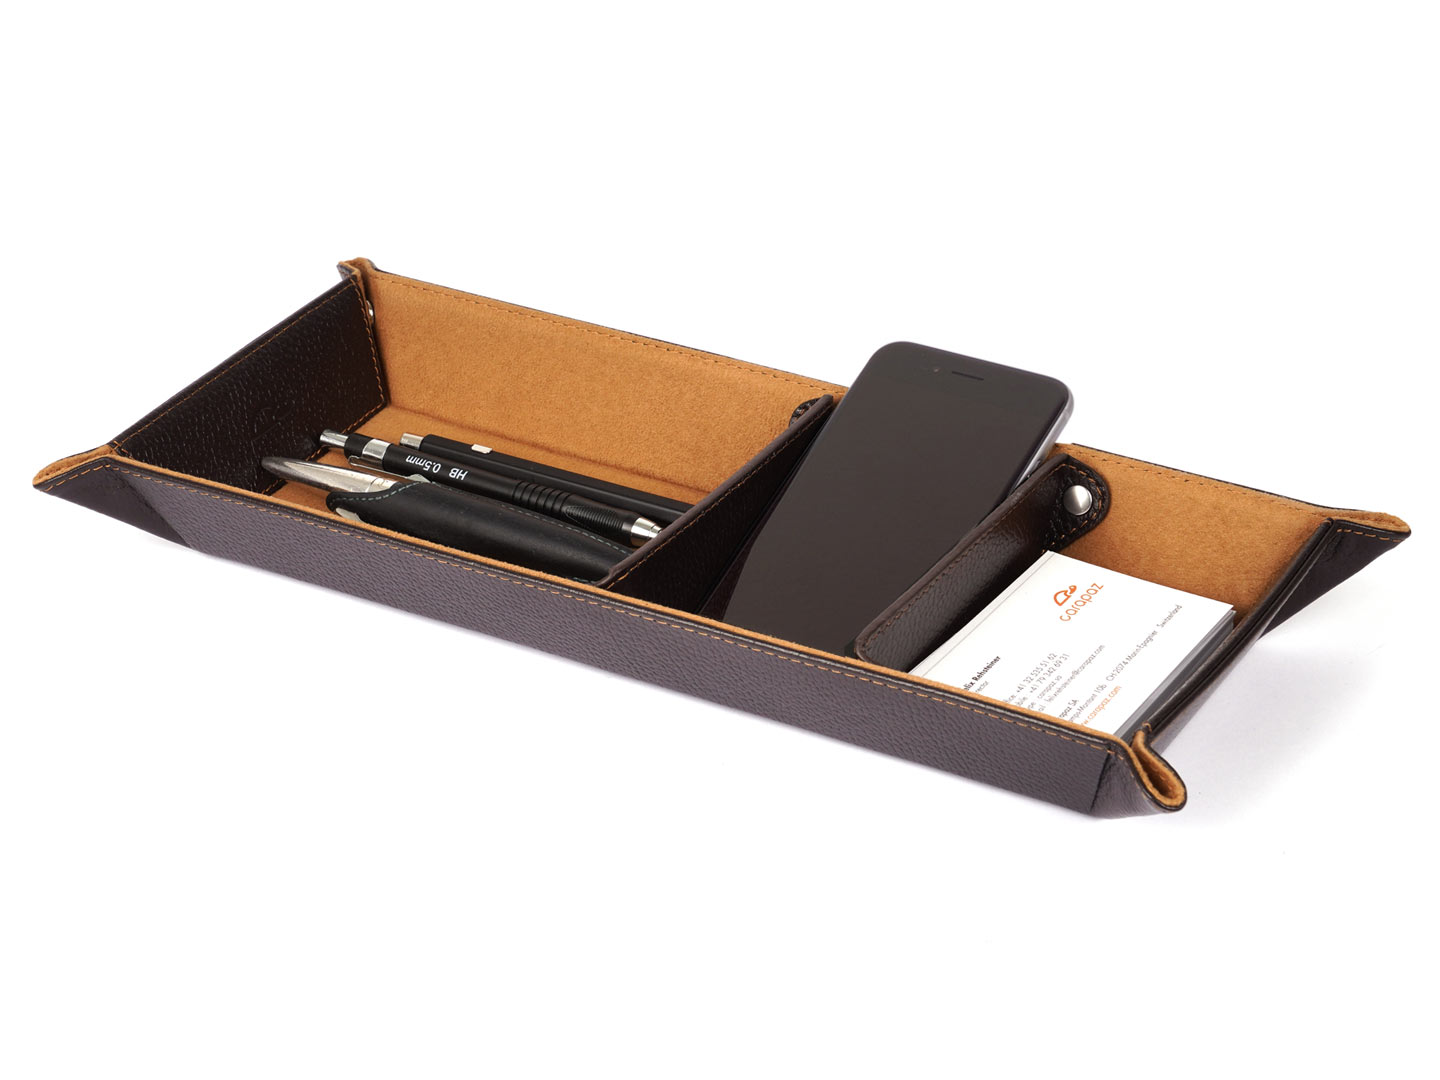 https://carapaz.com/cdn/shop/products/Desk-Organizer-Leather-Catchall-Tray-Pen-Cards-Holder-Office-brown-perspective-2-CARAPAZ_2000x.jpg?v=1598360394